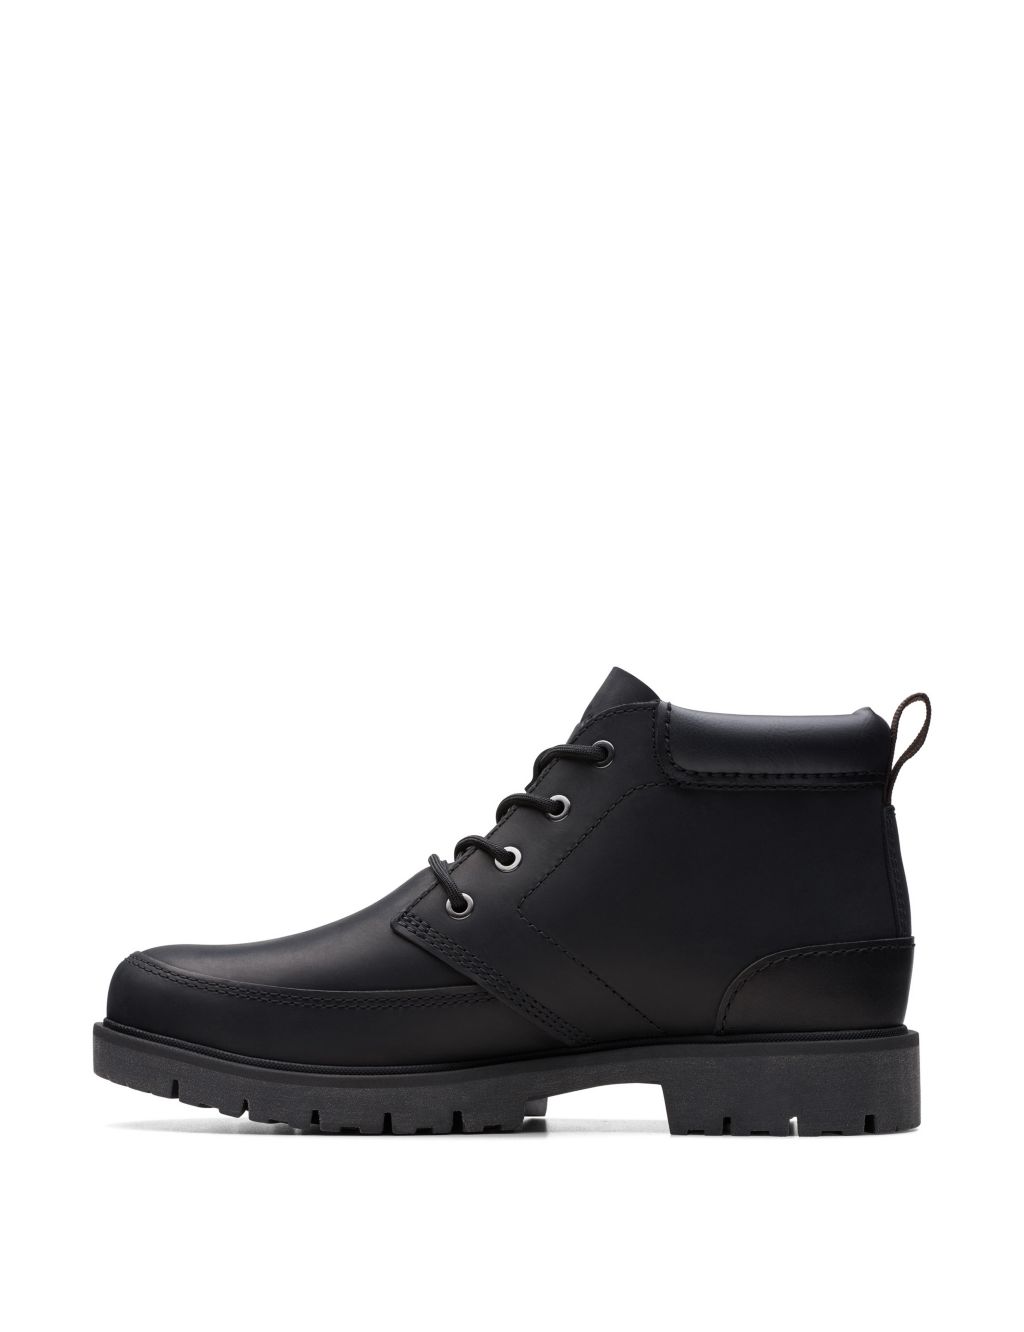 Leather Casual Boots image 6